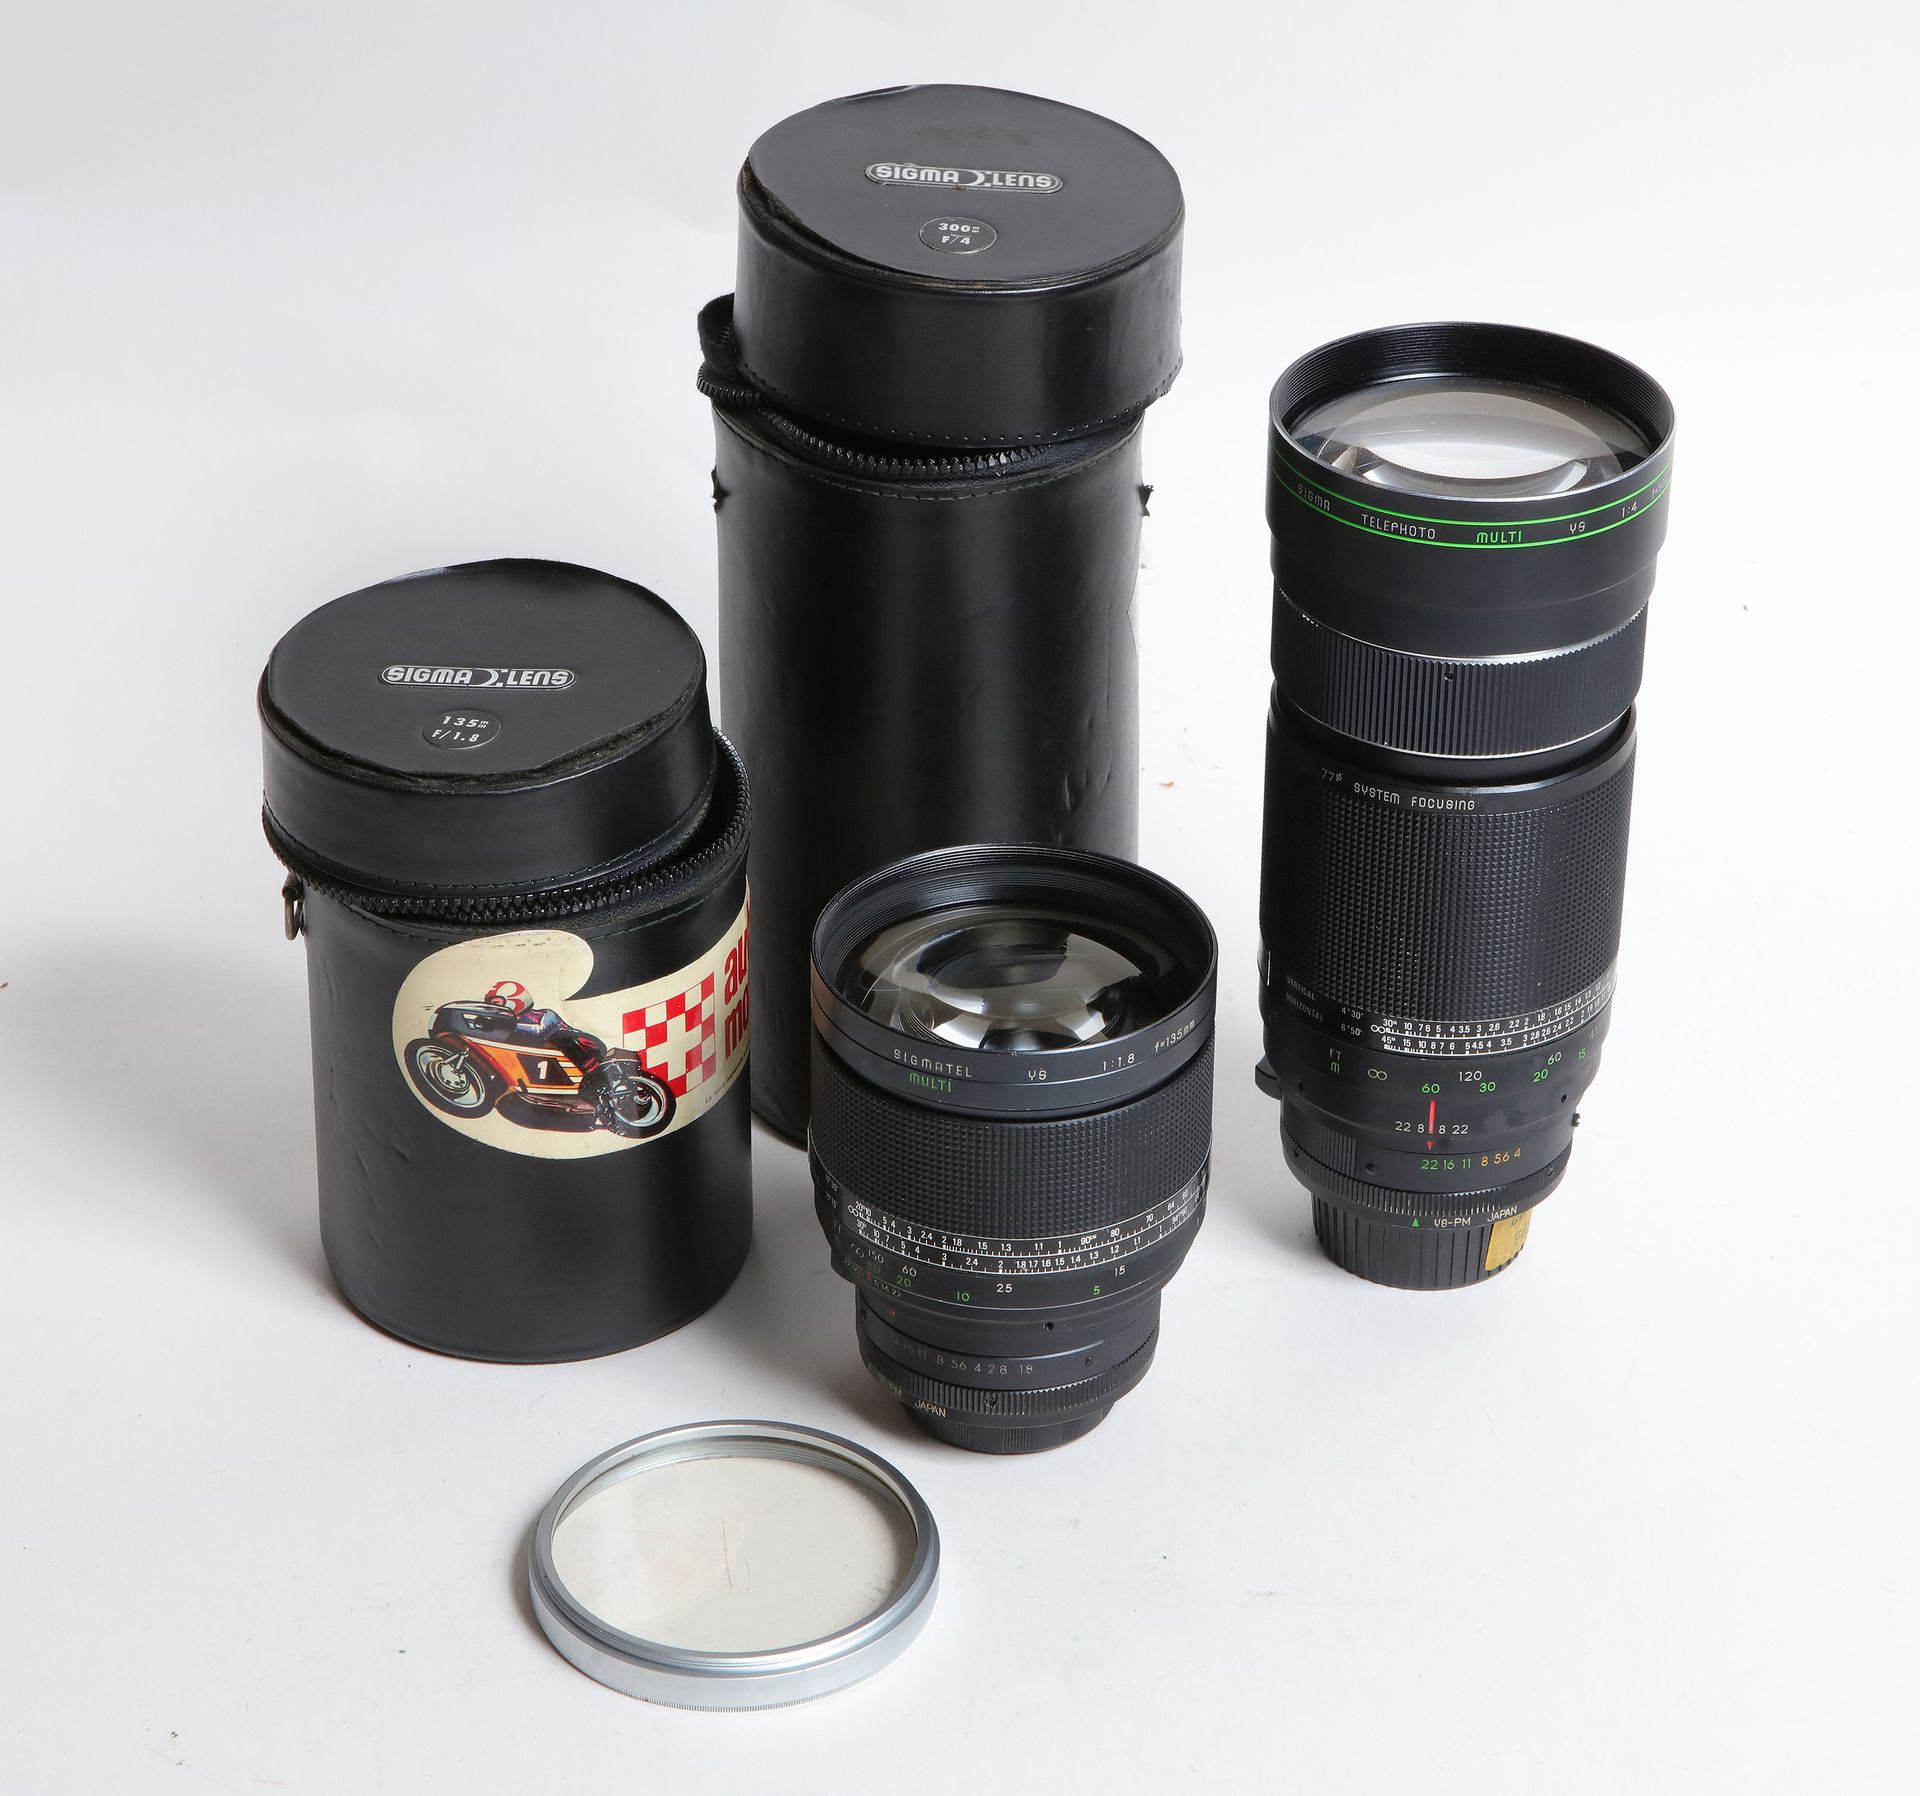 Null Camera, lens. Set of two Sigma lenses. Sigmatel YS 1.8/135 mm lens and Sigm&hellip;